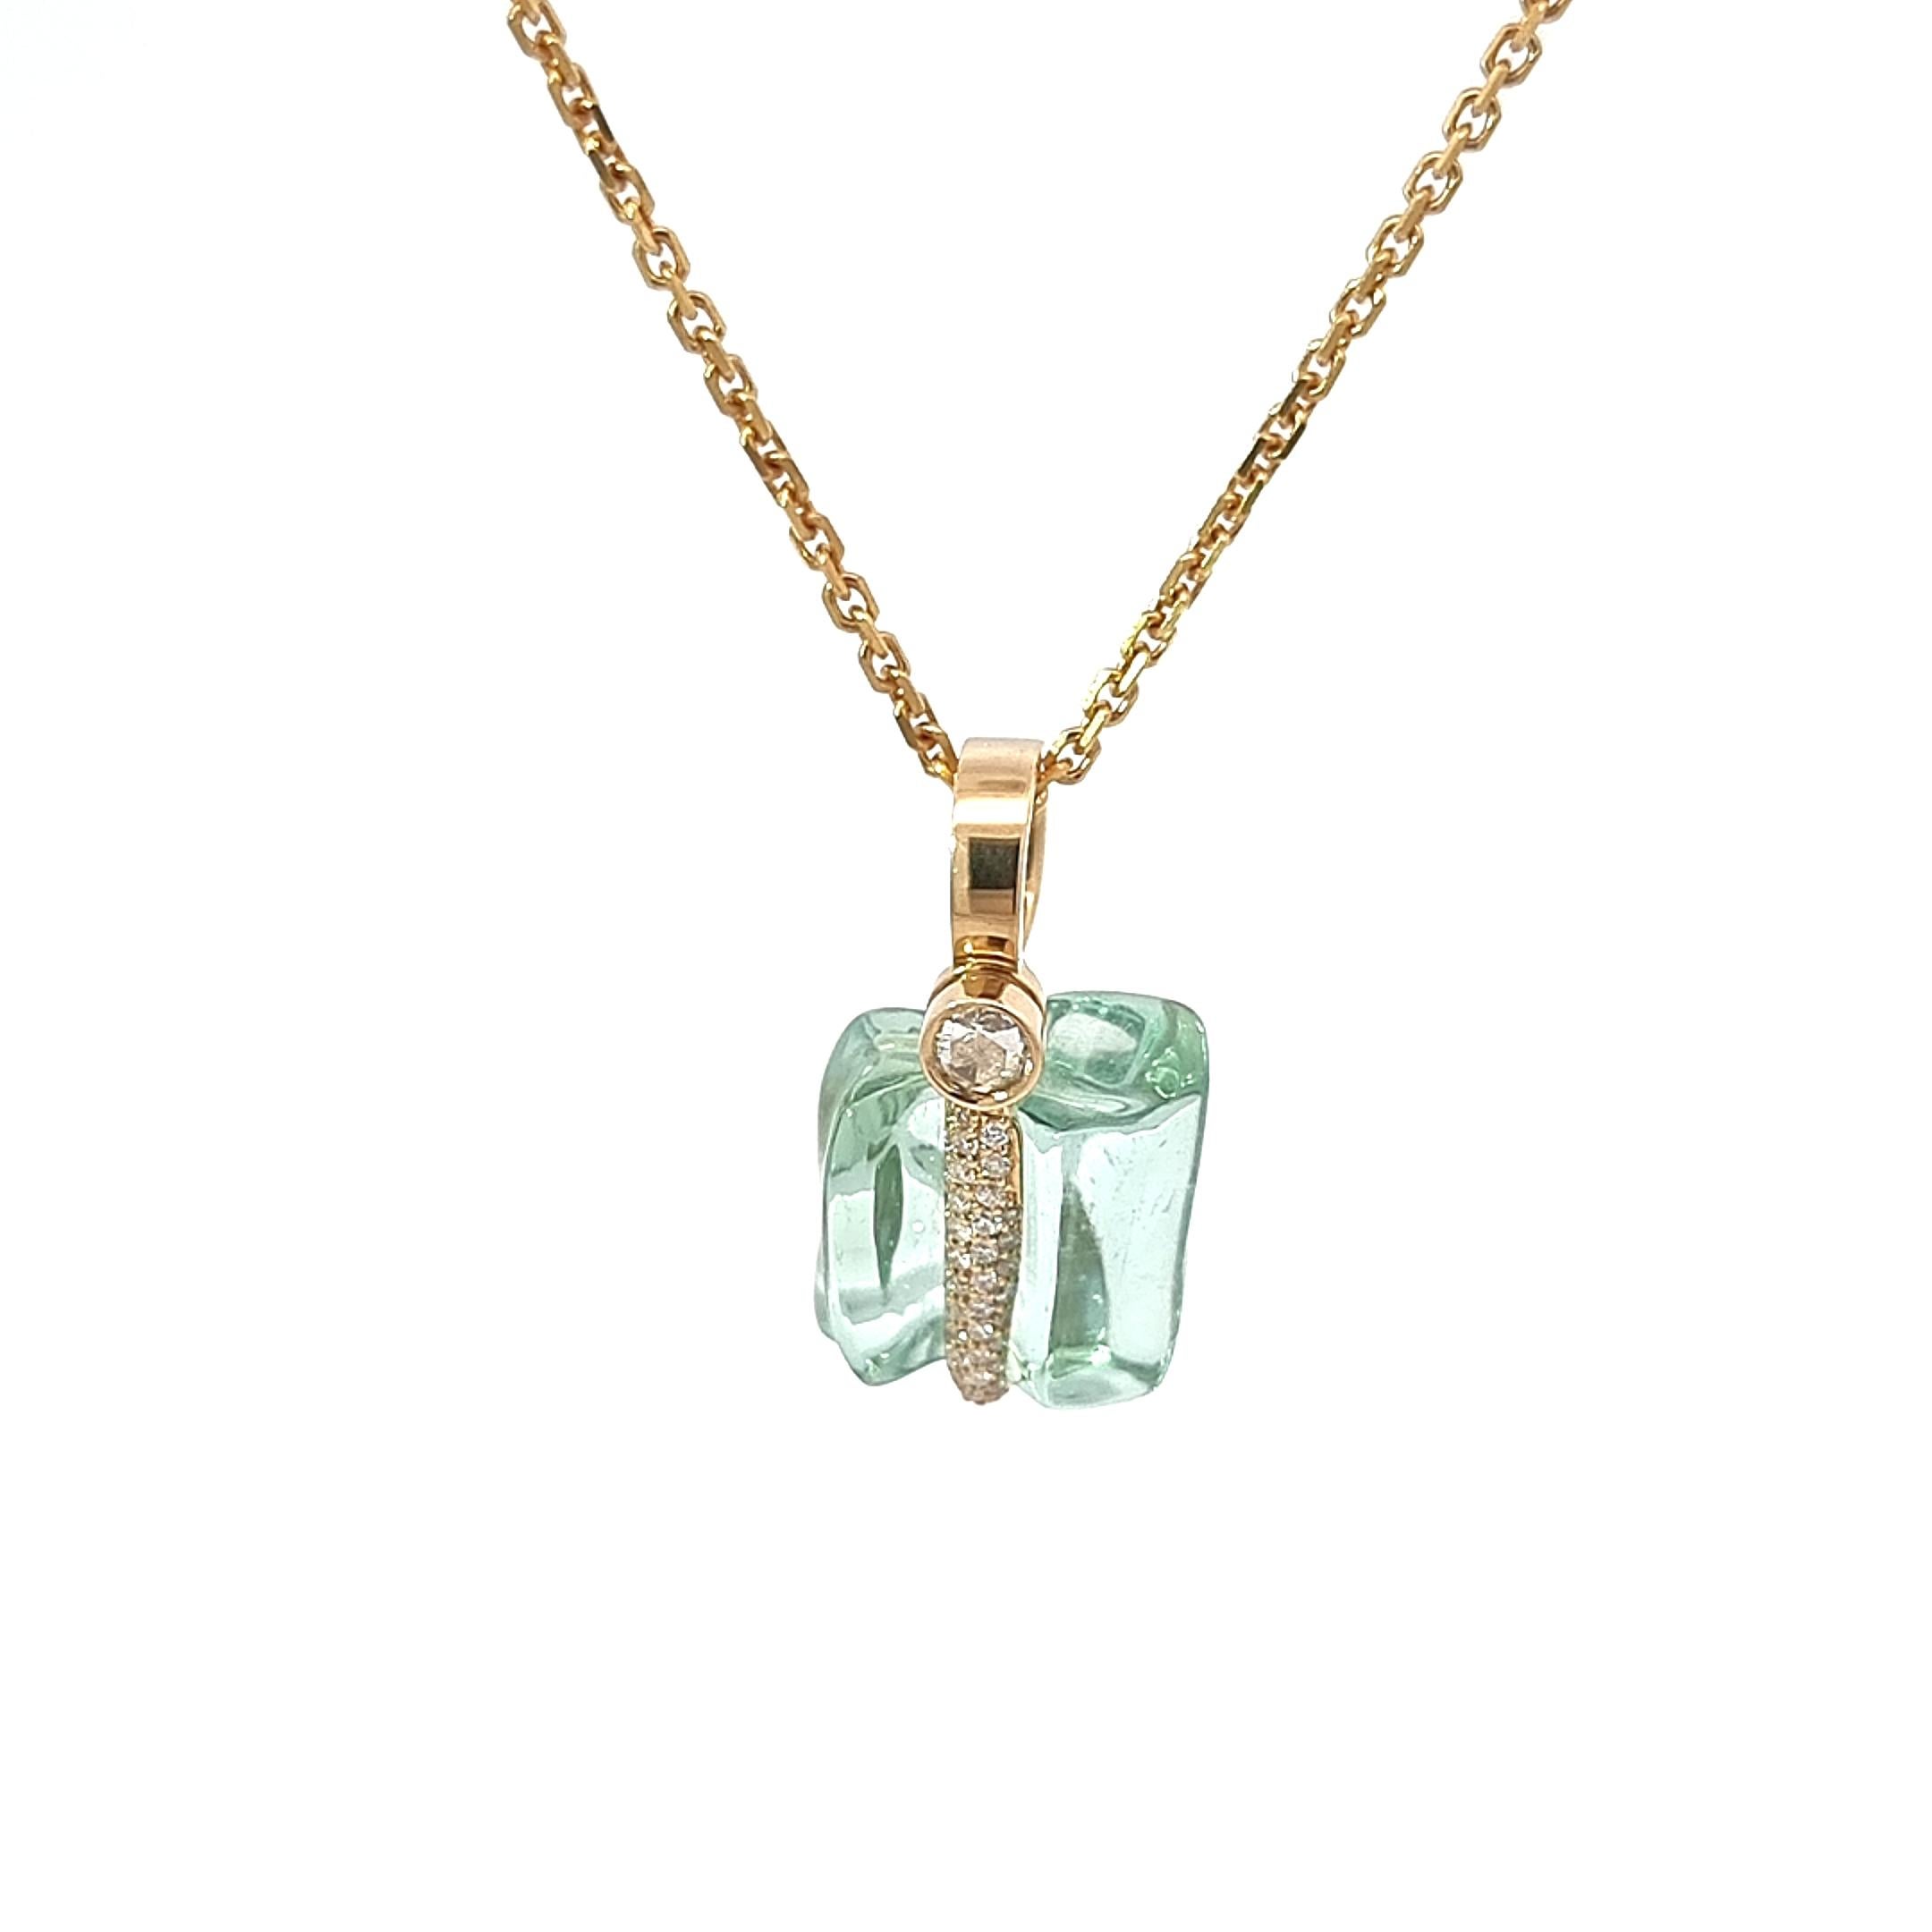 Organic collection by VOTIVE.

Discover the pinnacle of elegance in VOTIVE's Organic Collection – an 18K yellow gold pendant showcasing an uncut aquamarine, echoing the pristine beauty of nature. Complemented by white diamonds, this pendant